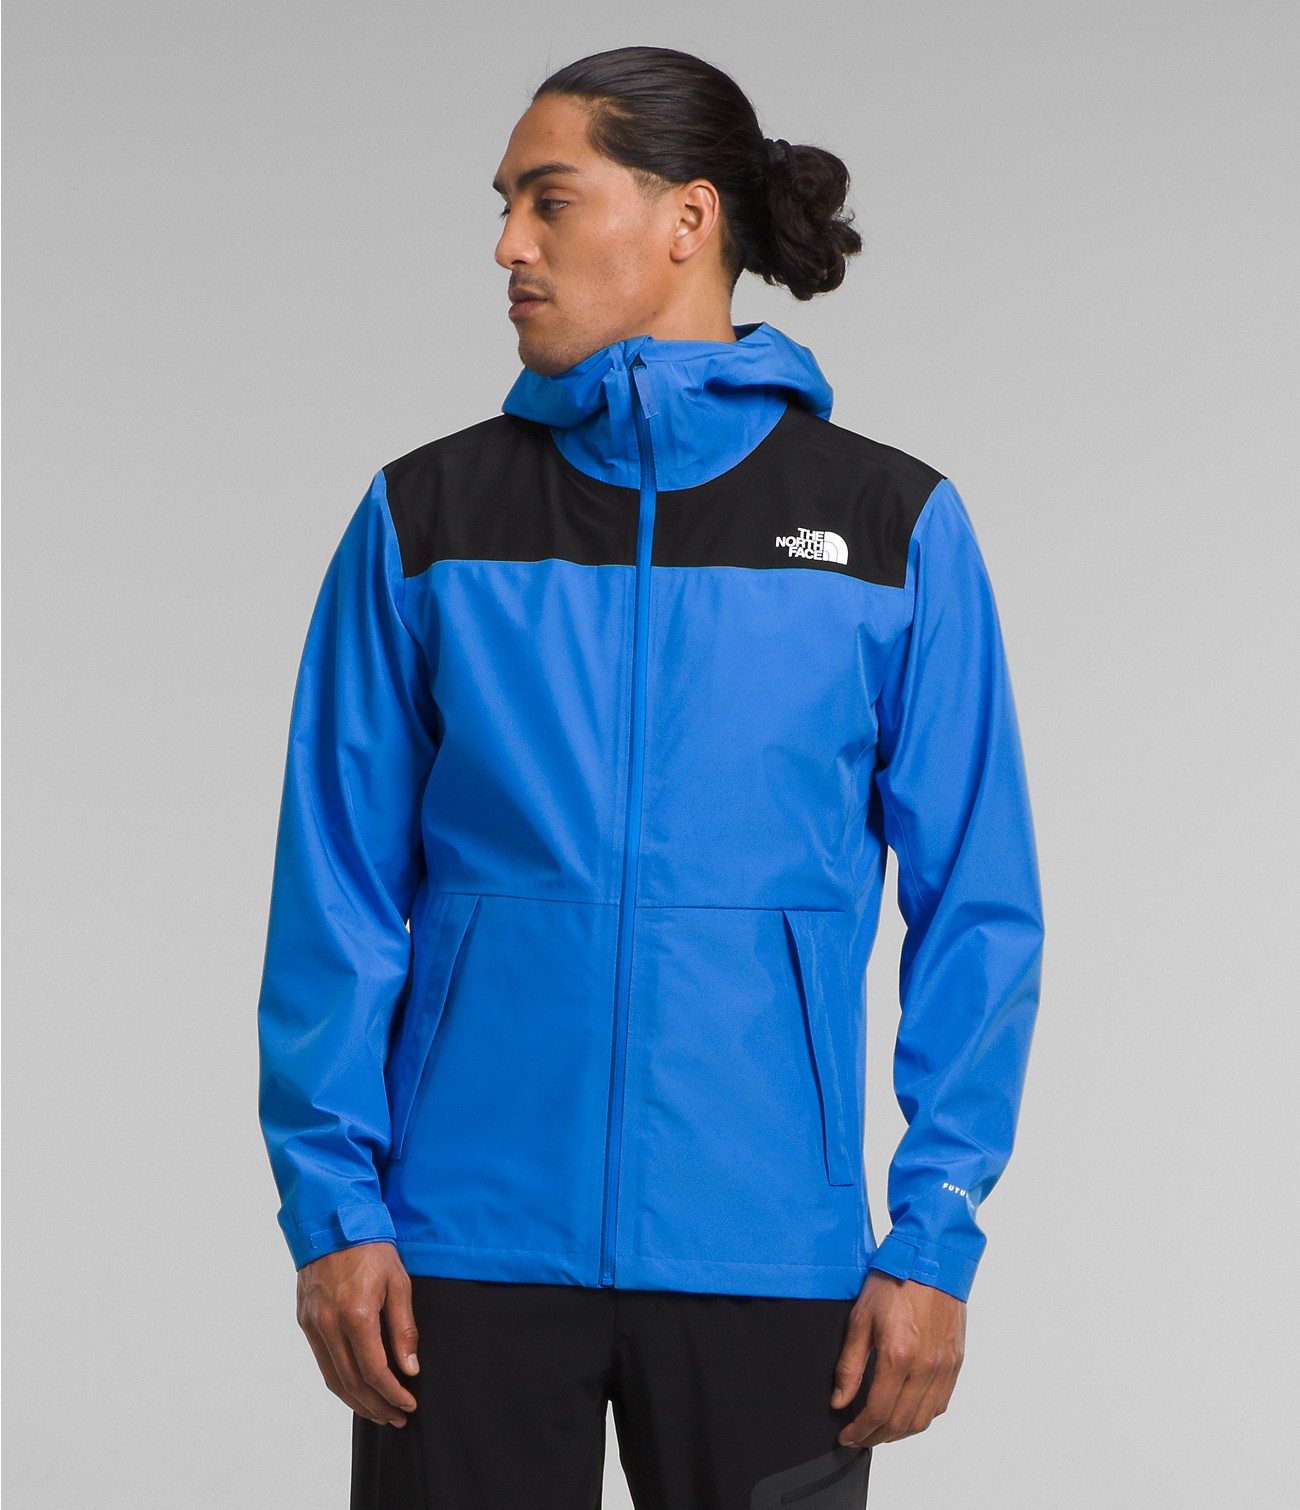 Unlock Wilderness' choice in the Outdoor Research Vs North Face comparison, the Dryzzle FUTURELIGHT™ Jacket by The North Face